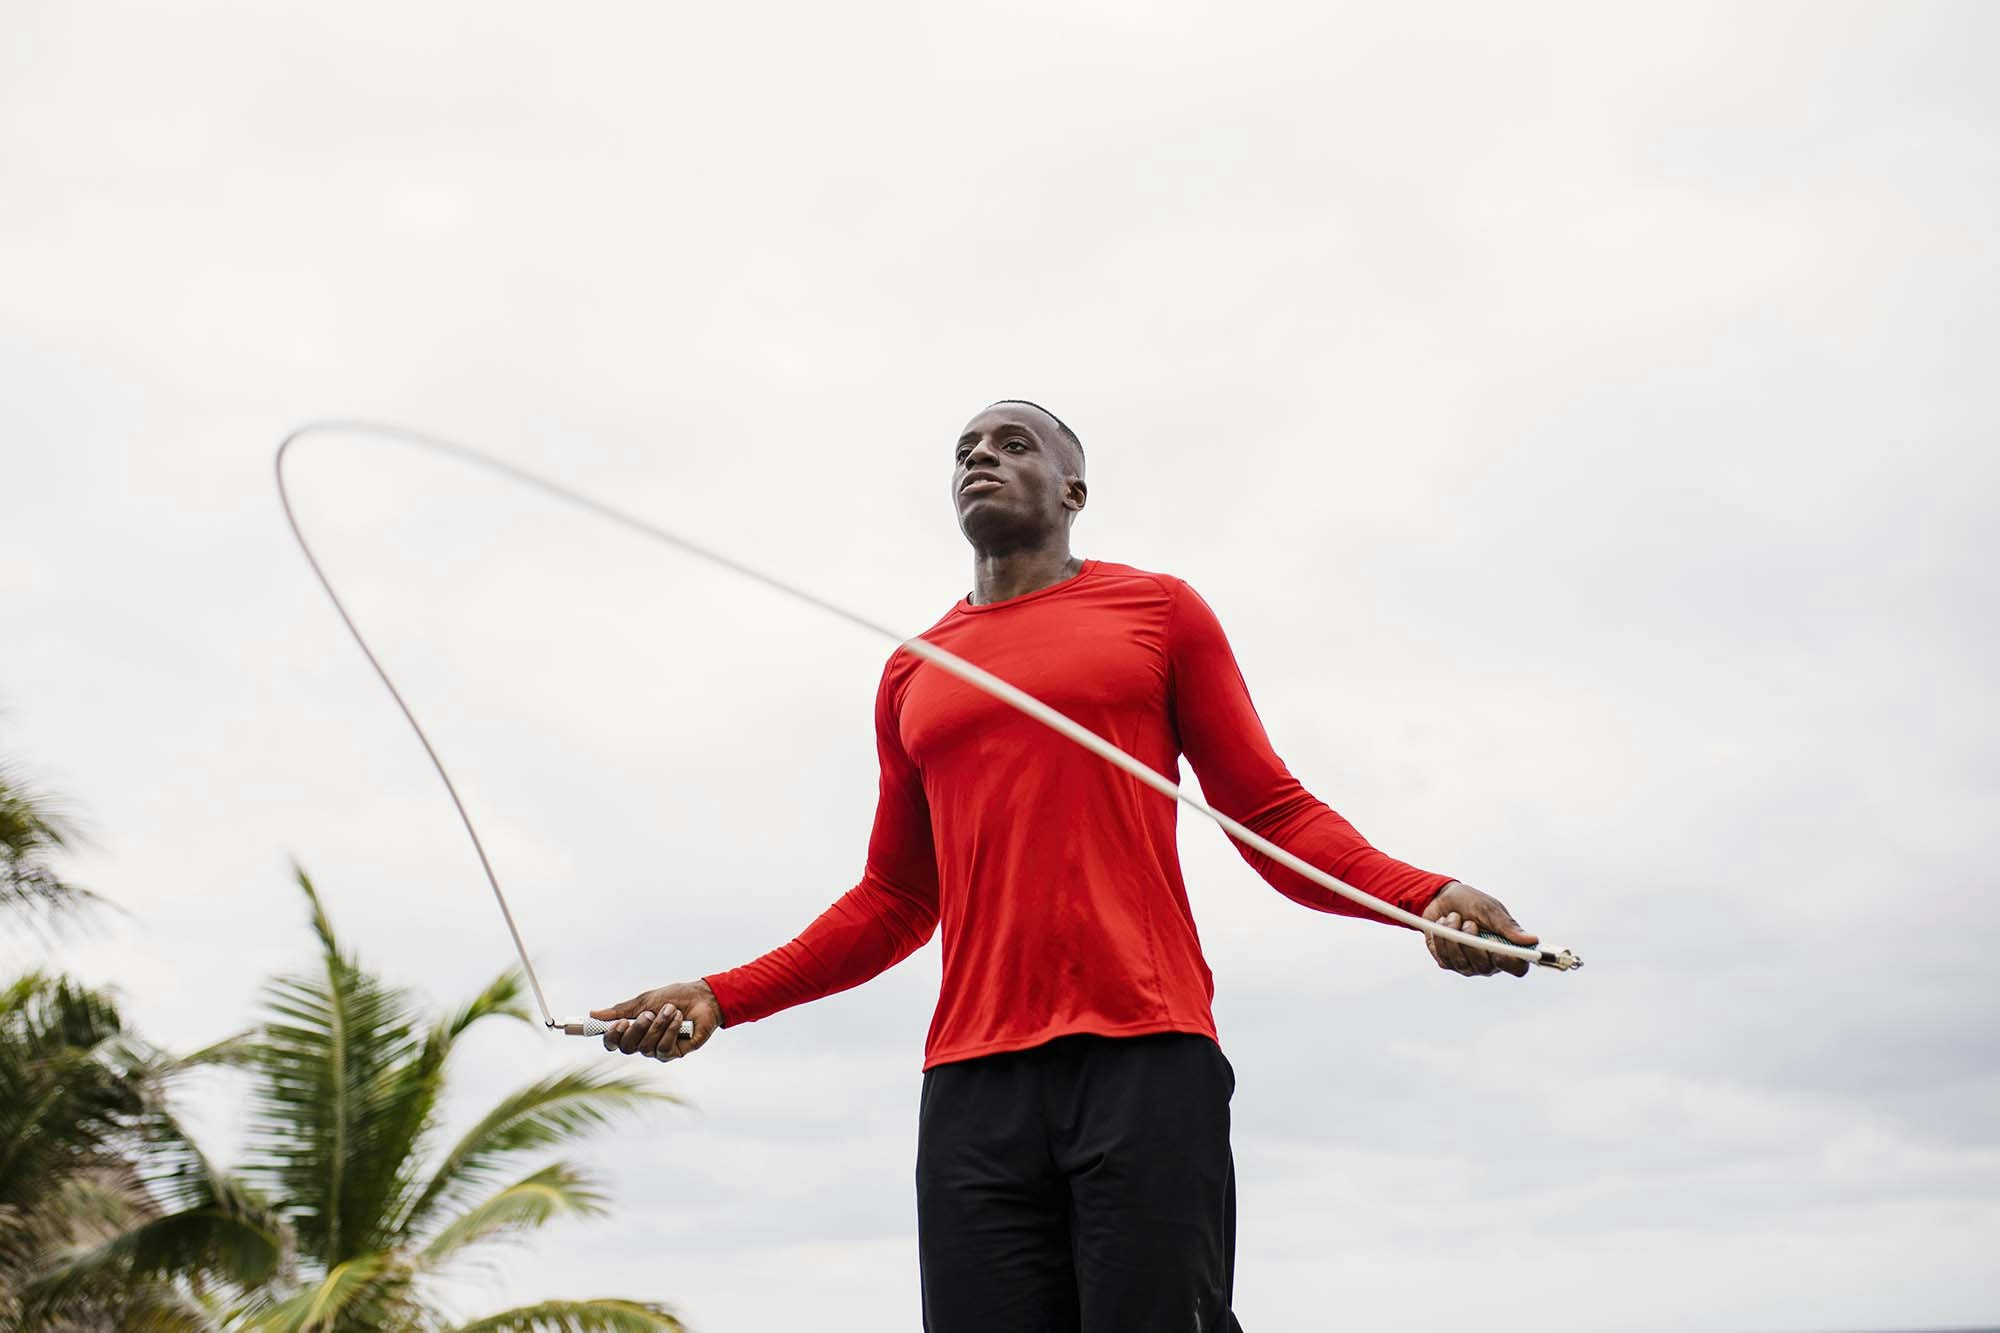 A man in a red tee jumping rope, with palm trees in the background